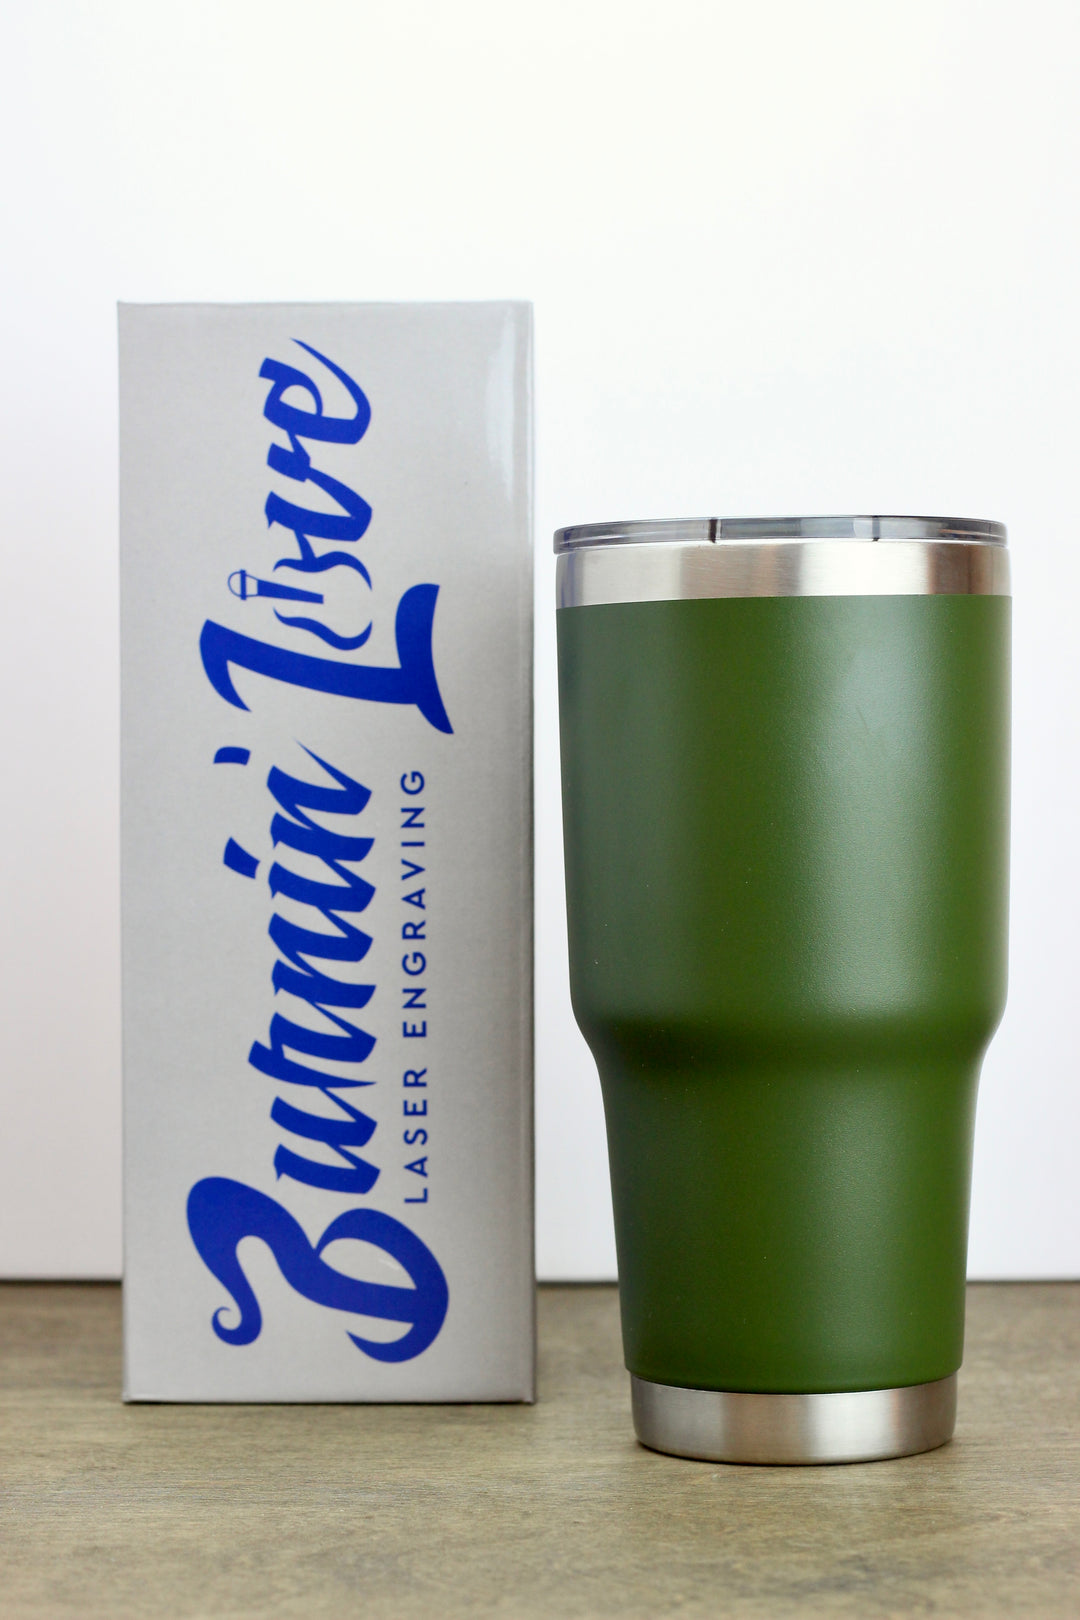 30 Oz. RTIC TUMBLER Personalized With Laser Engraved Name Phrase